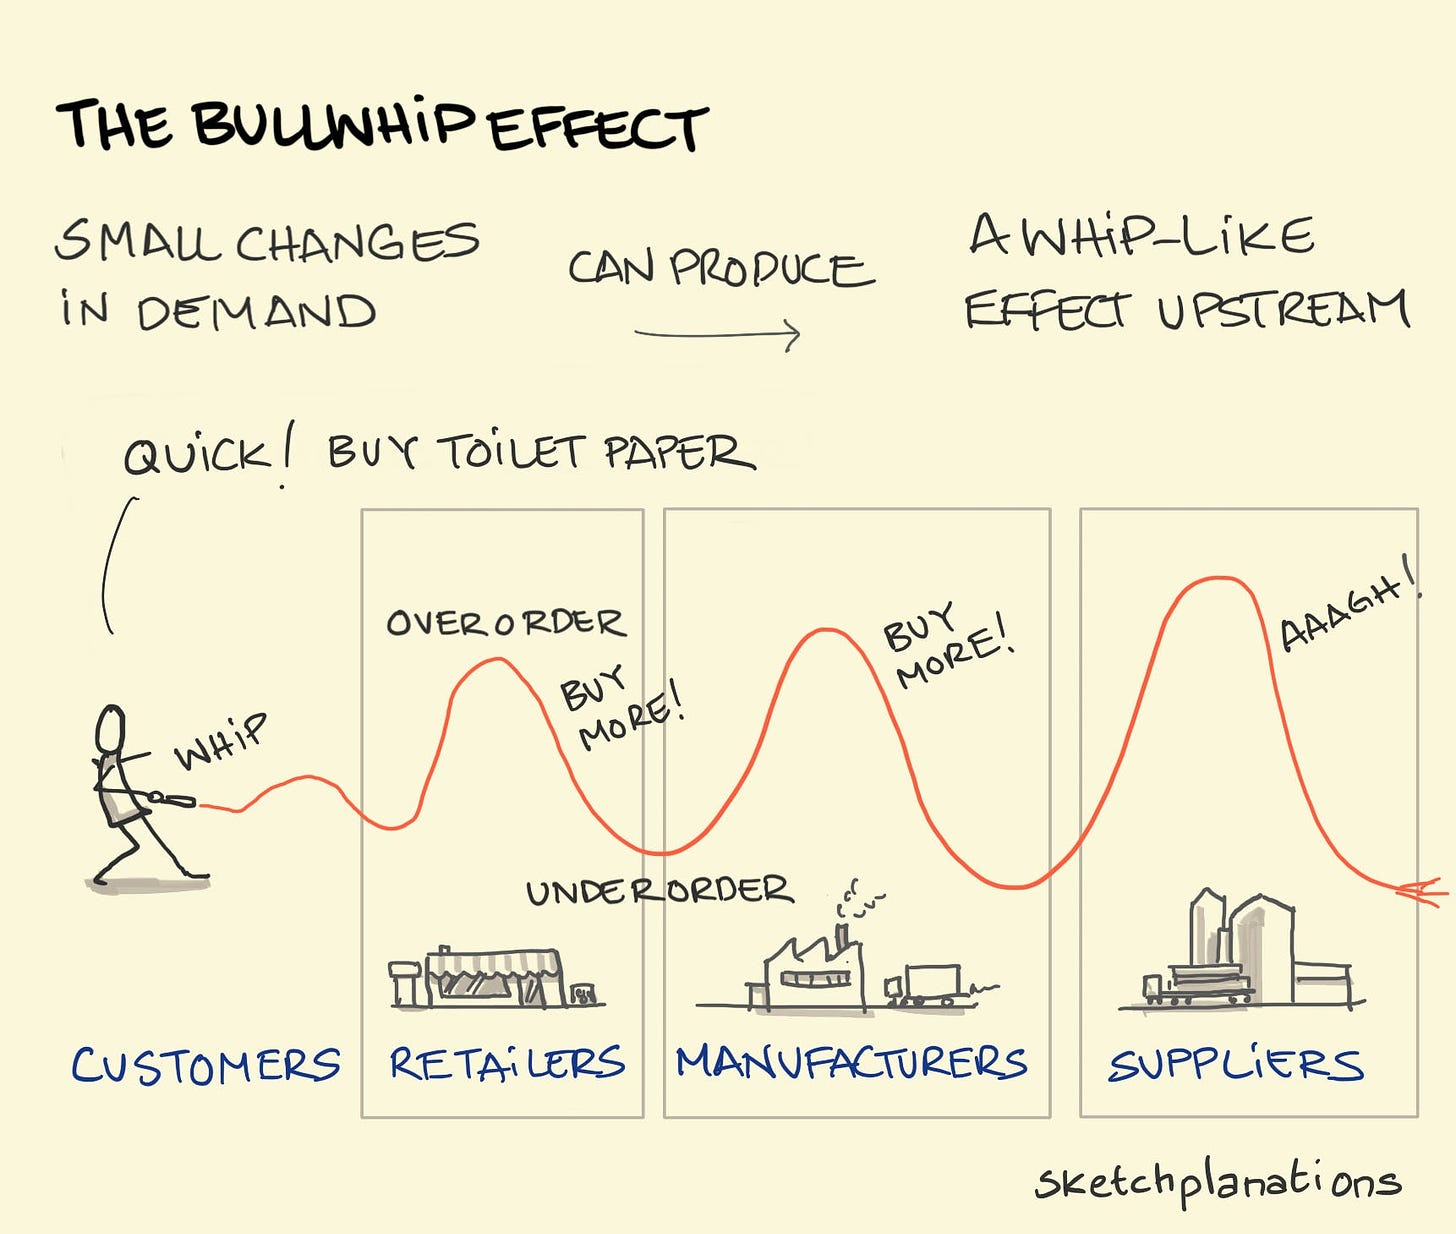 The Bullwhip Effect - Sketchplanations